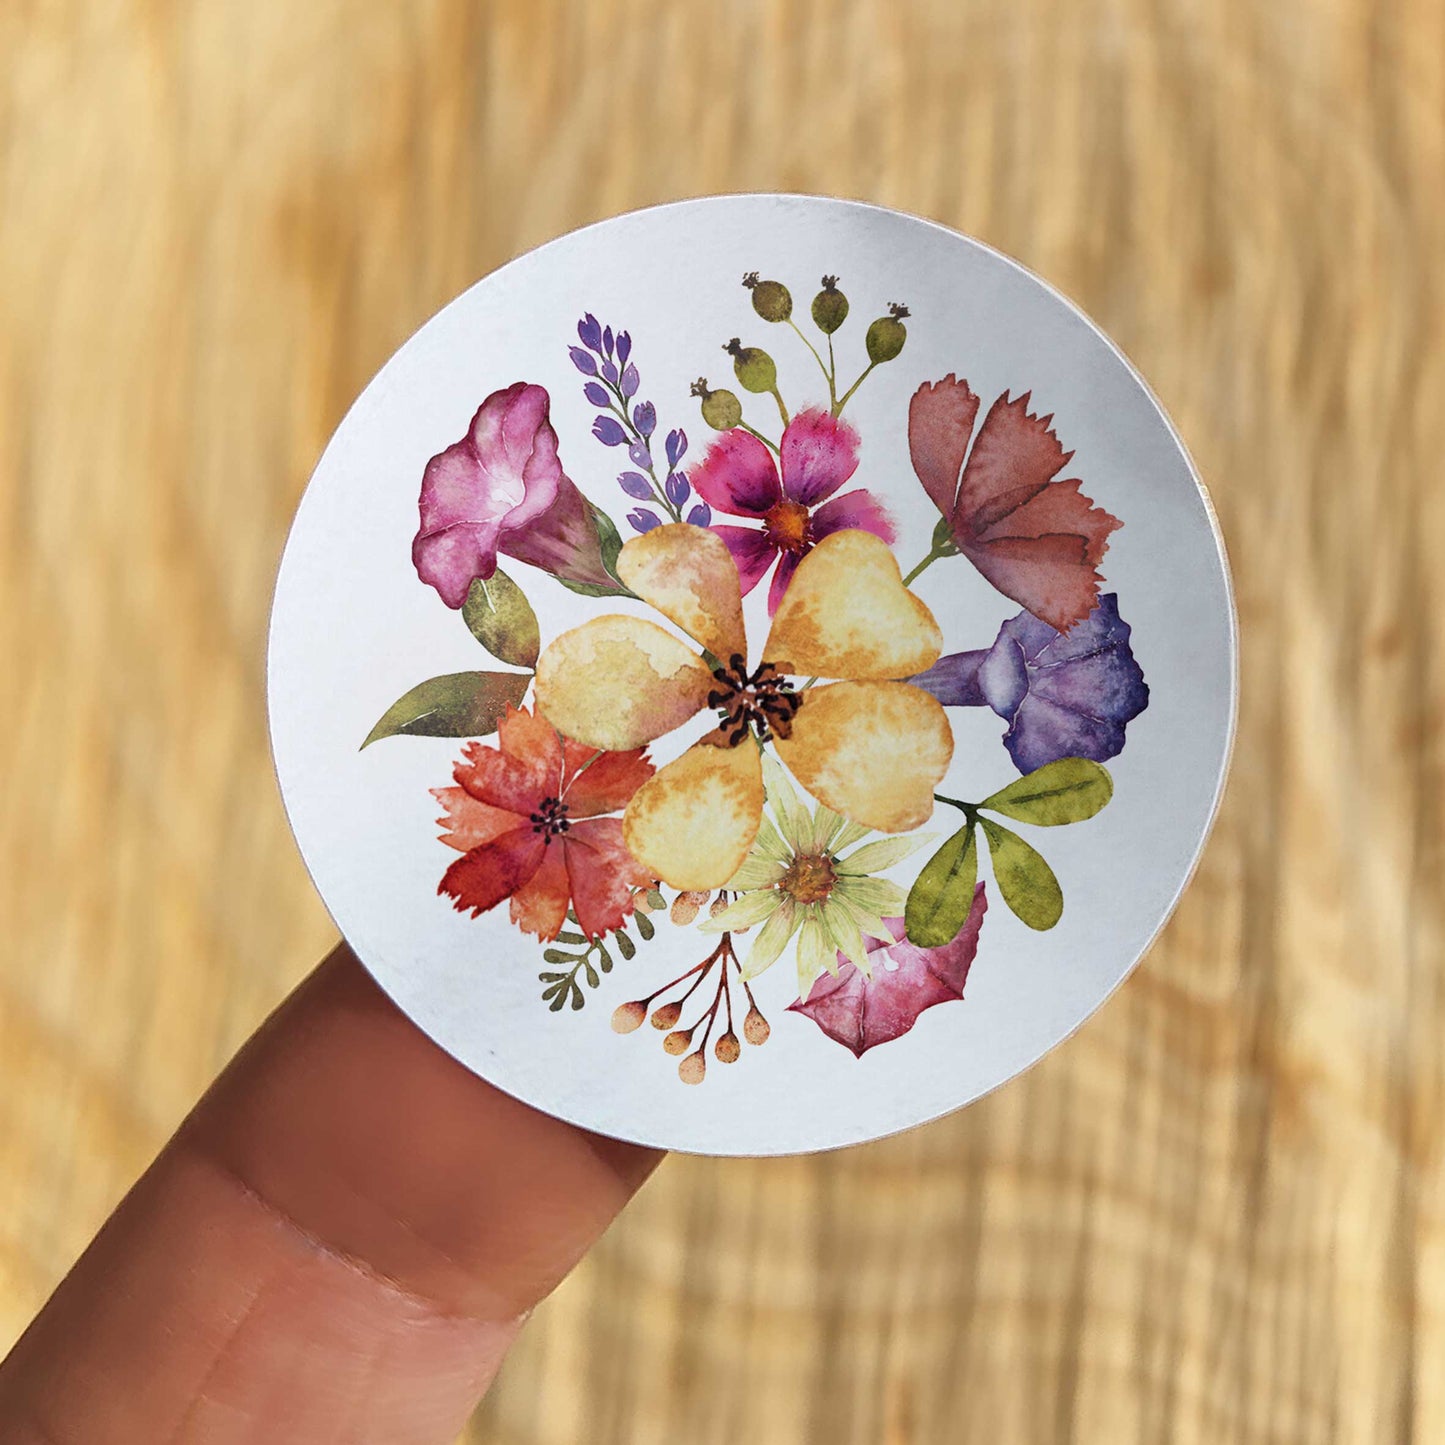 Delicate Wildflowers Stickers (35 stickers)